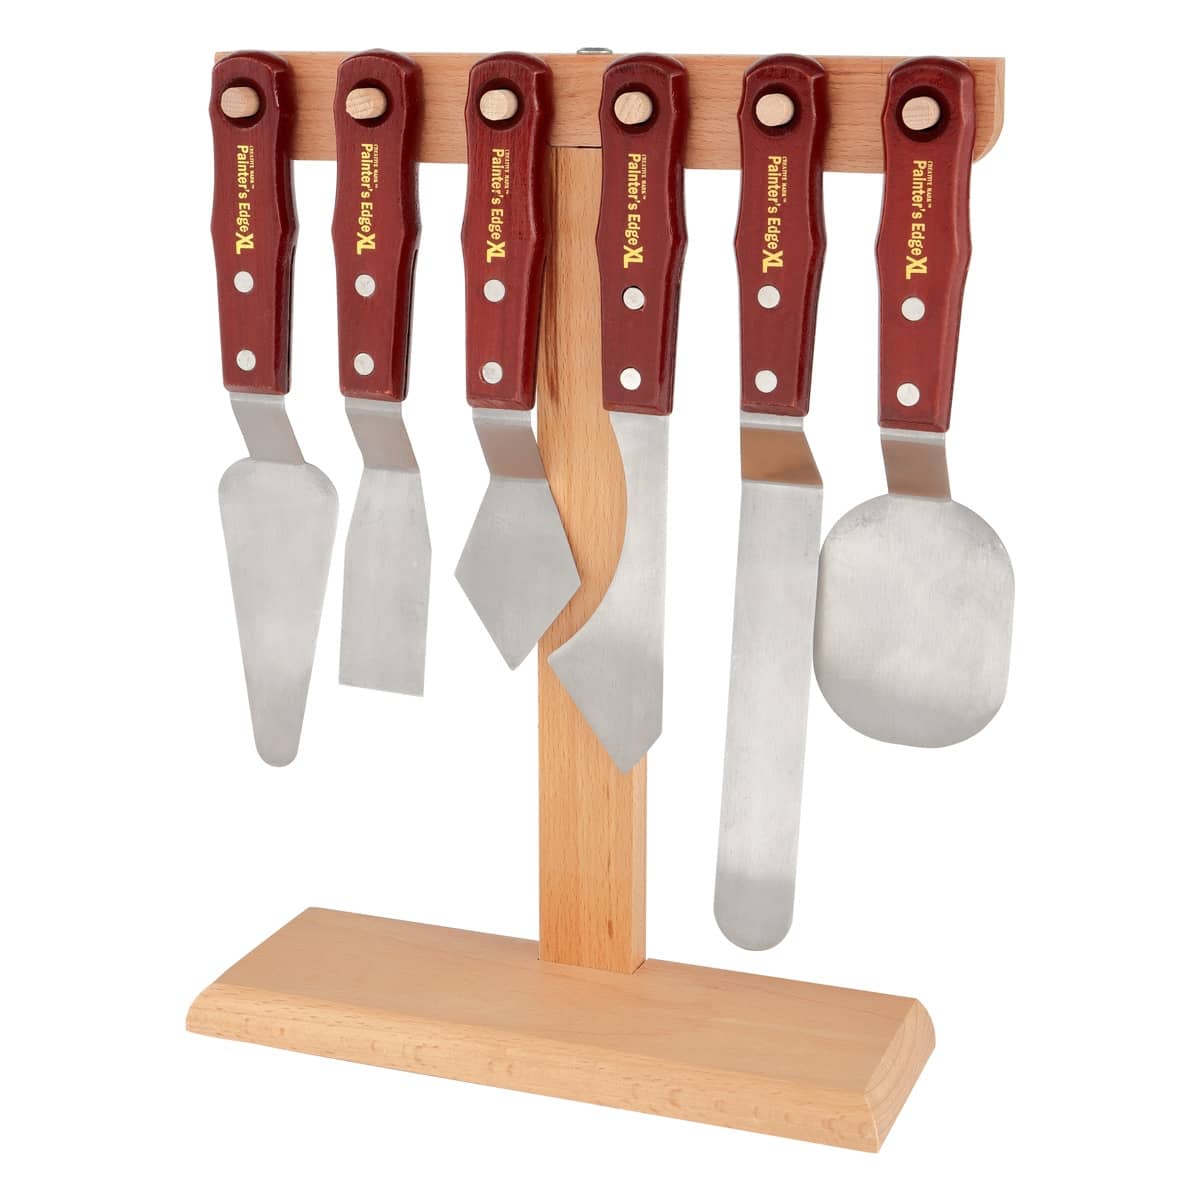 Painter's Edge XL Palette Knife & Stand Set of 6